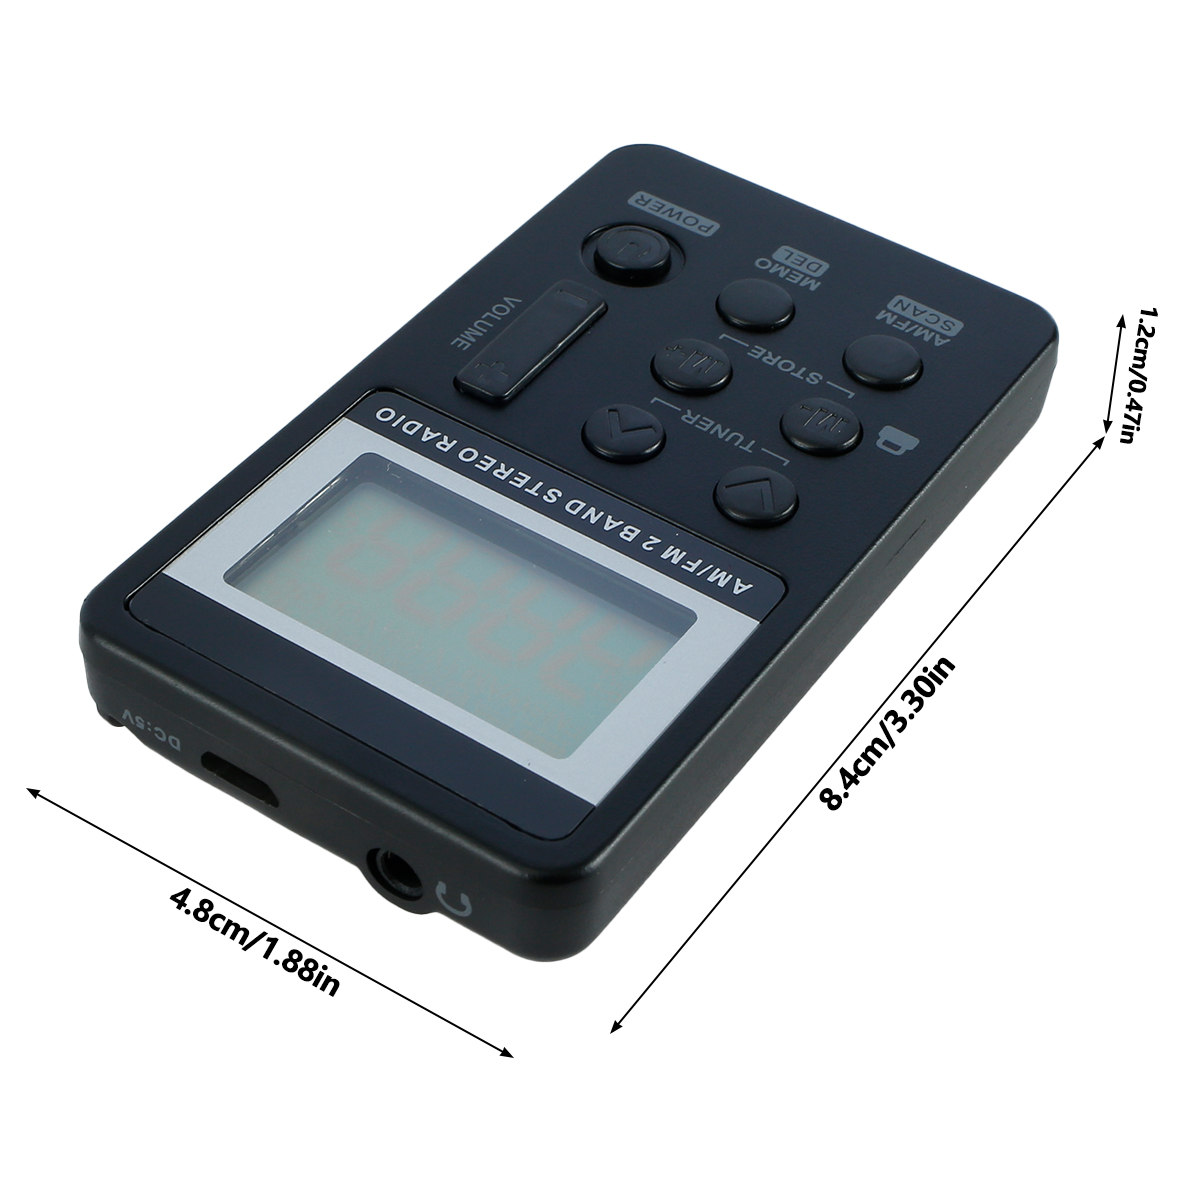 Portable AM/FM Radio, Black, Rechargeable Walkman Radio with LCD Display for Jogging - image 5 of 9